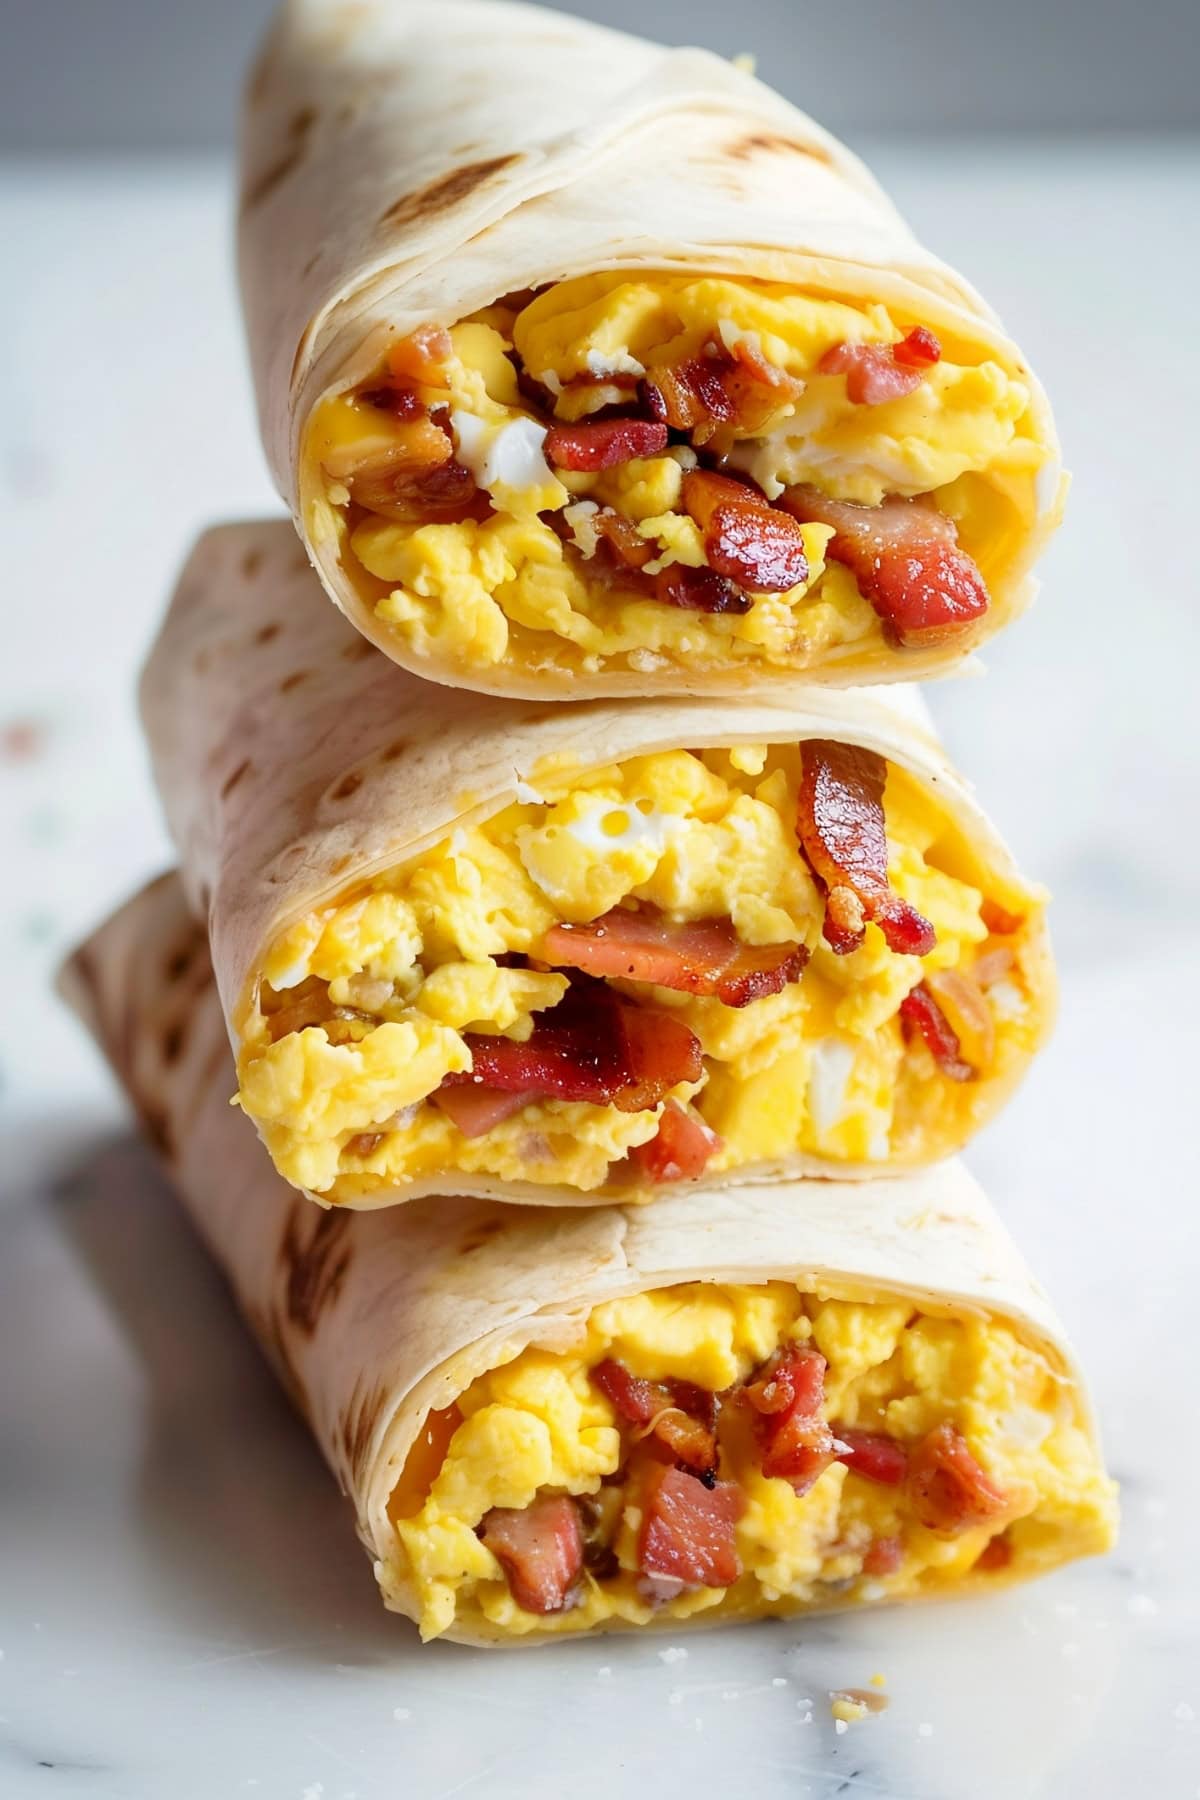 A breakfast wrap filled with crispy bacon, scrambled eggs, and melted cheese.